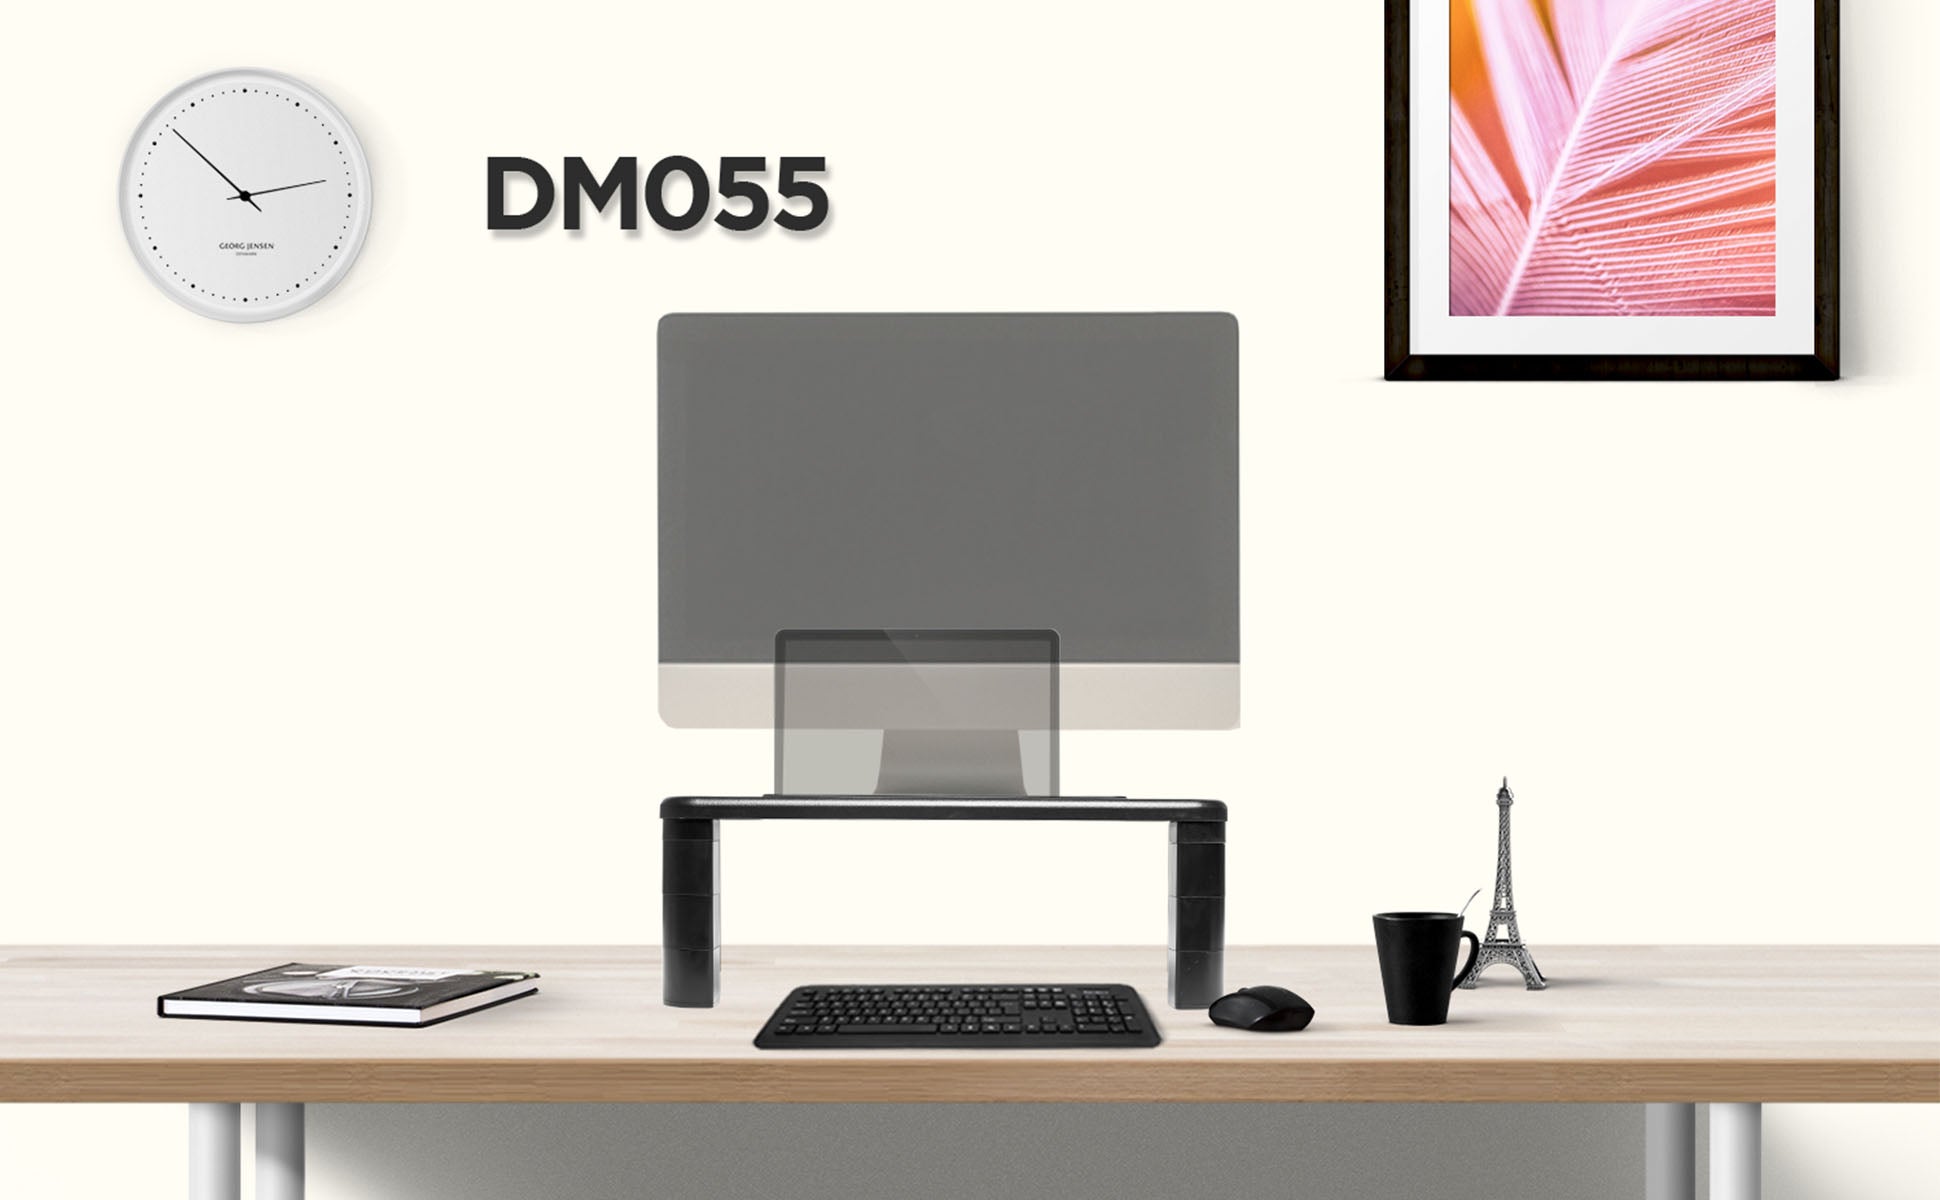 dm055, desk, mount, riser, stand, monitor, screen, computer, laptop, keyboard, tidy, space saver, office